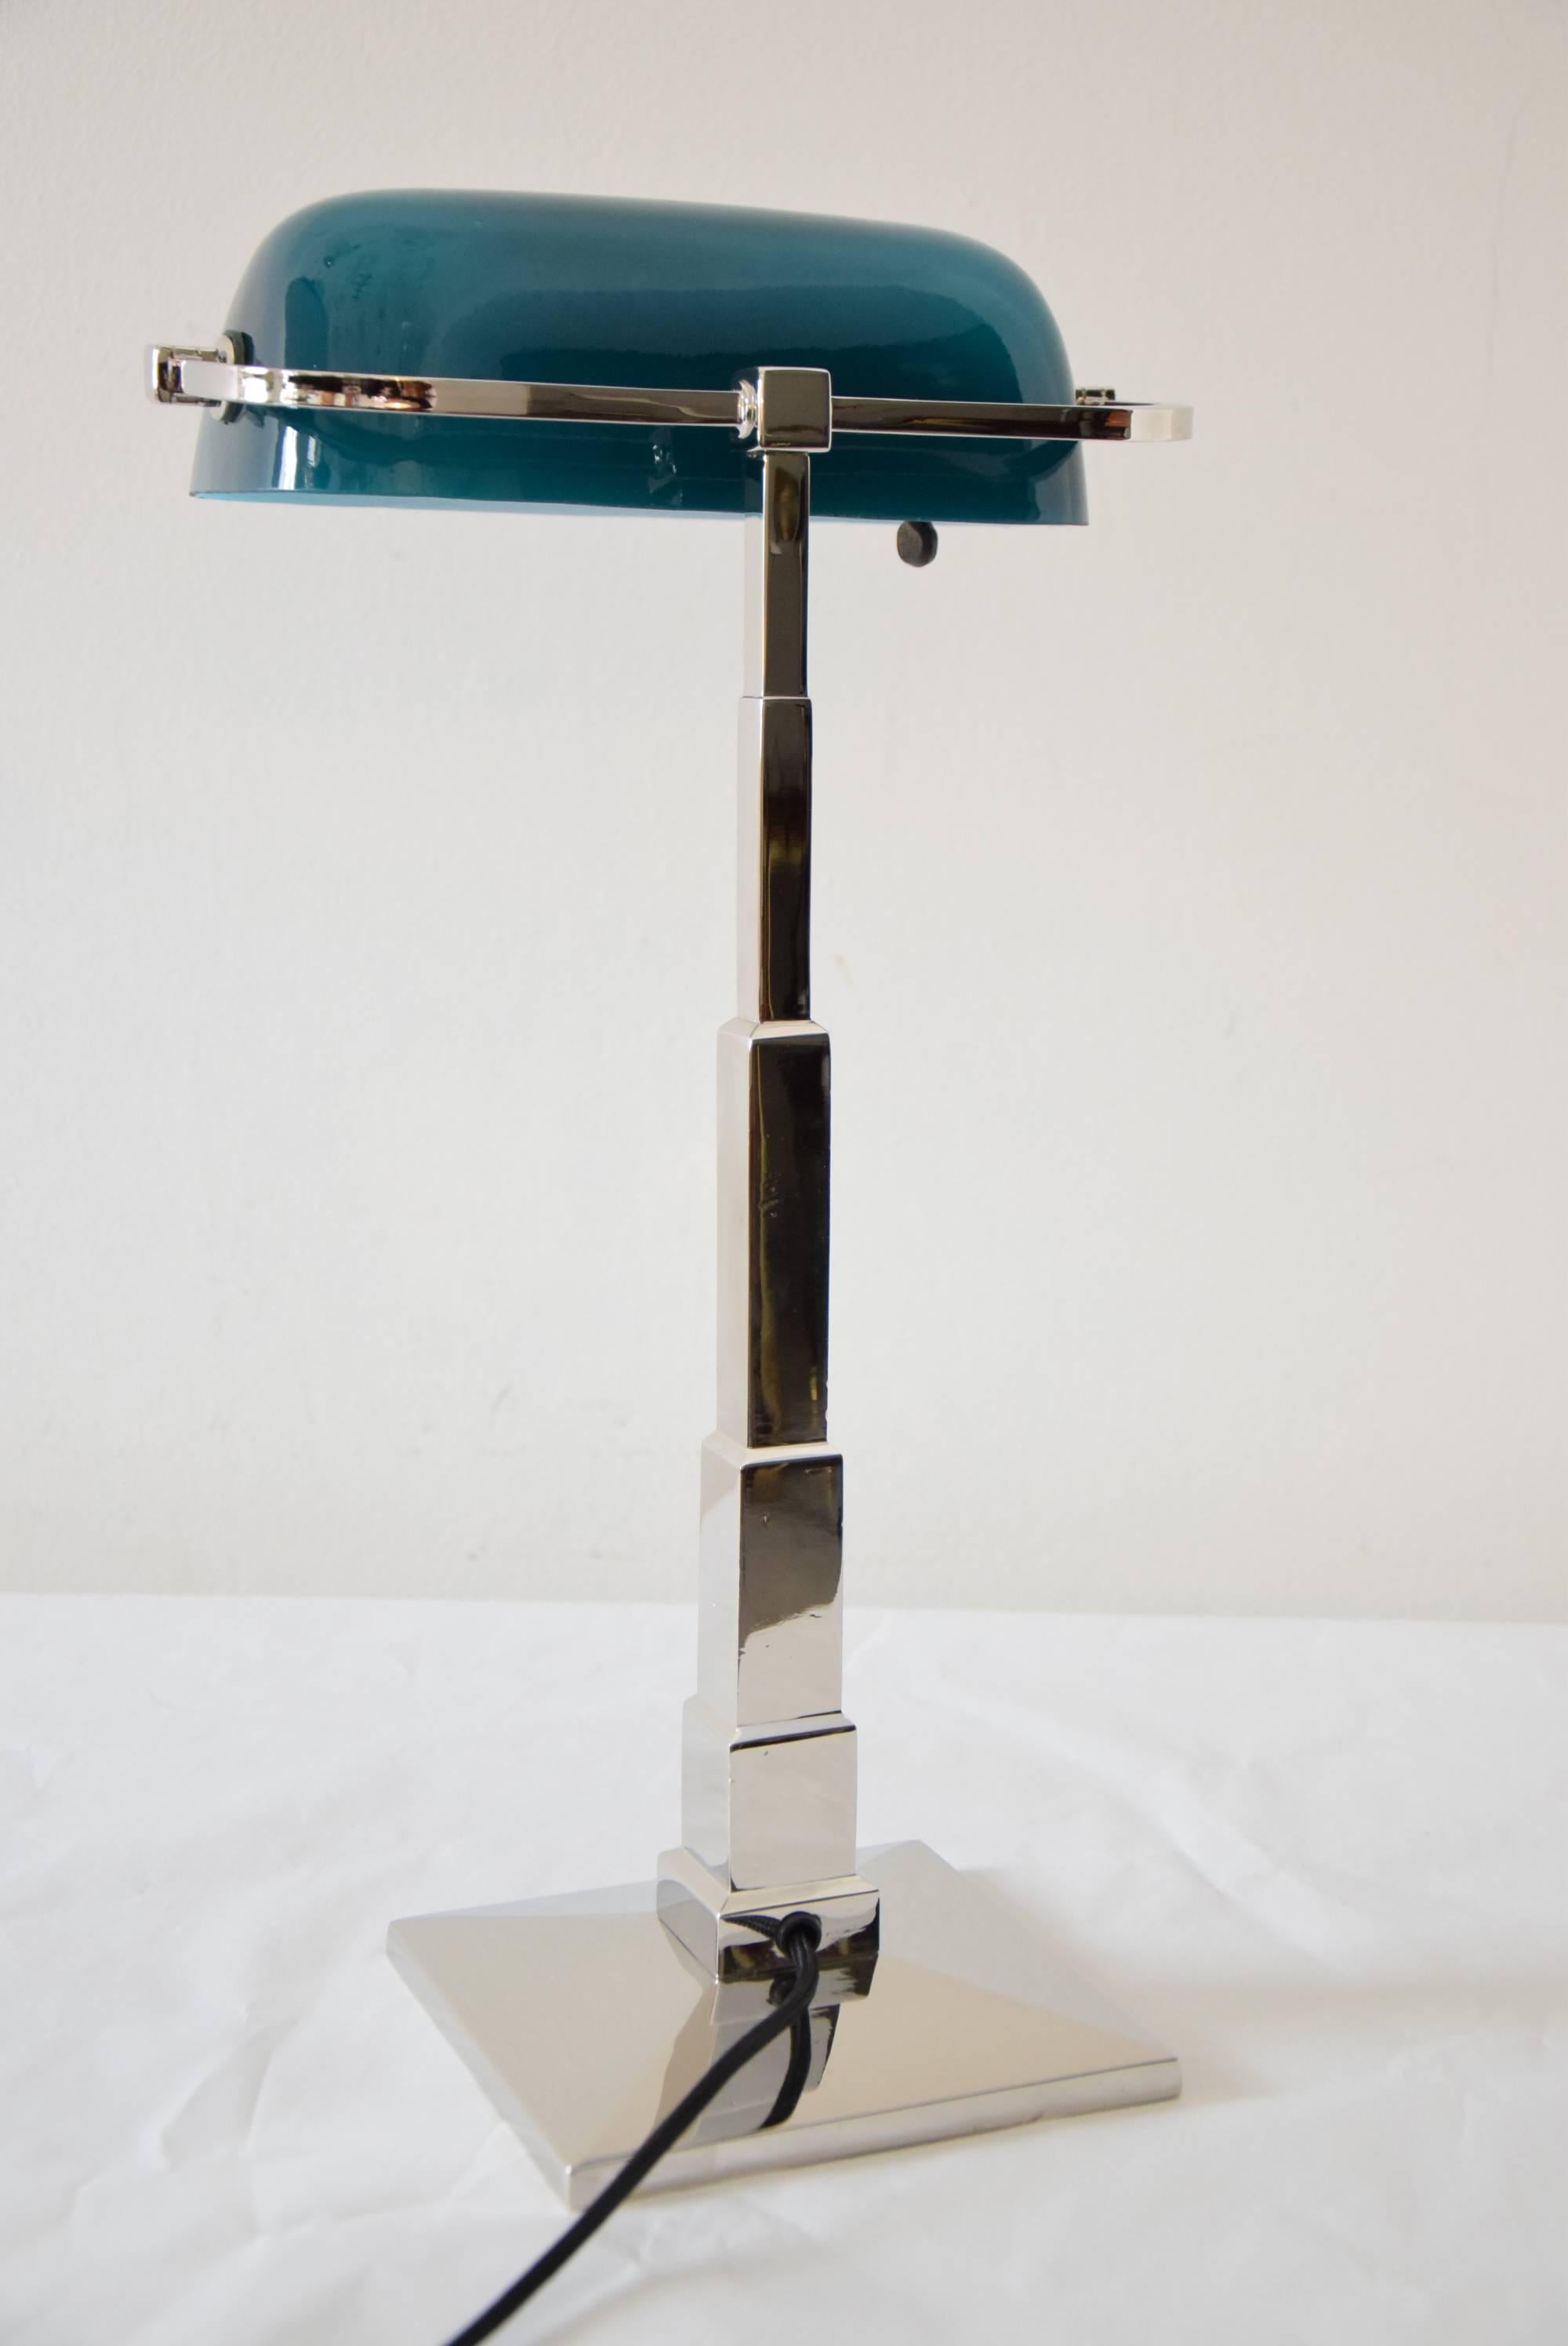 Plated Banker's Desk Lamp Nickel Platend with Green-Blue Glass